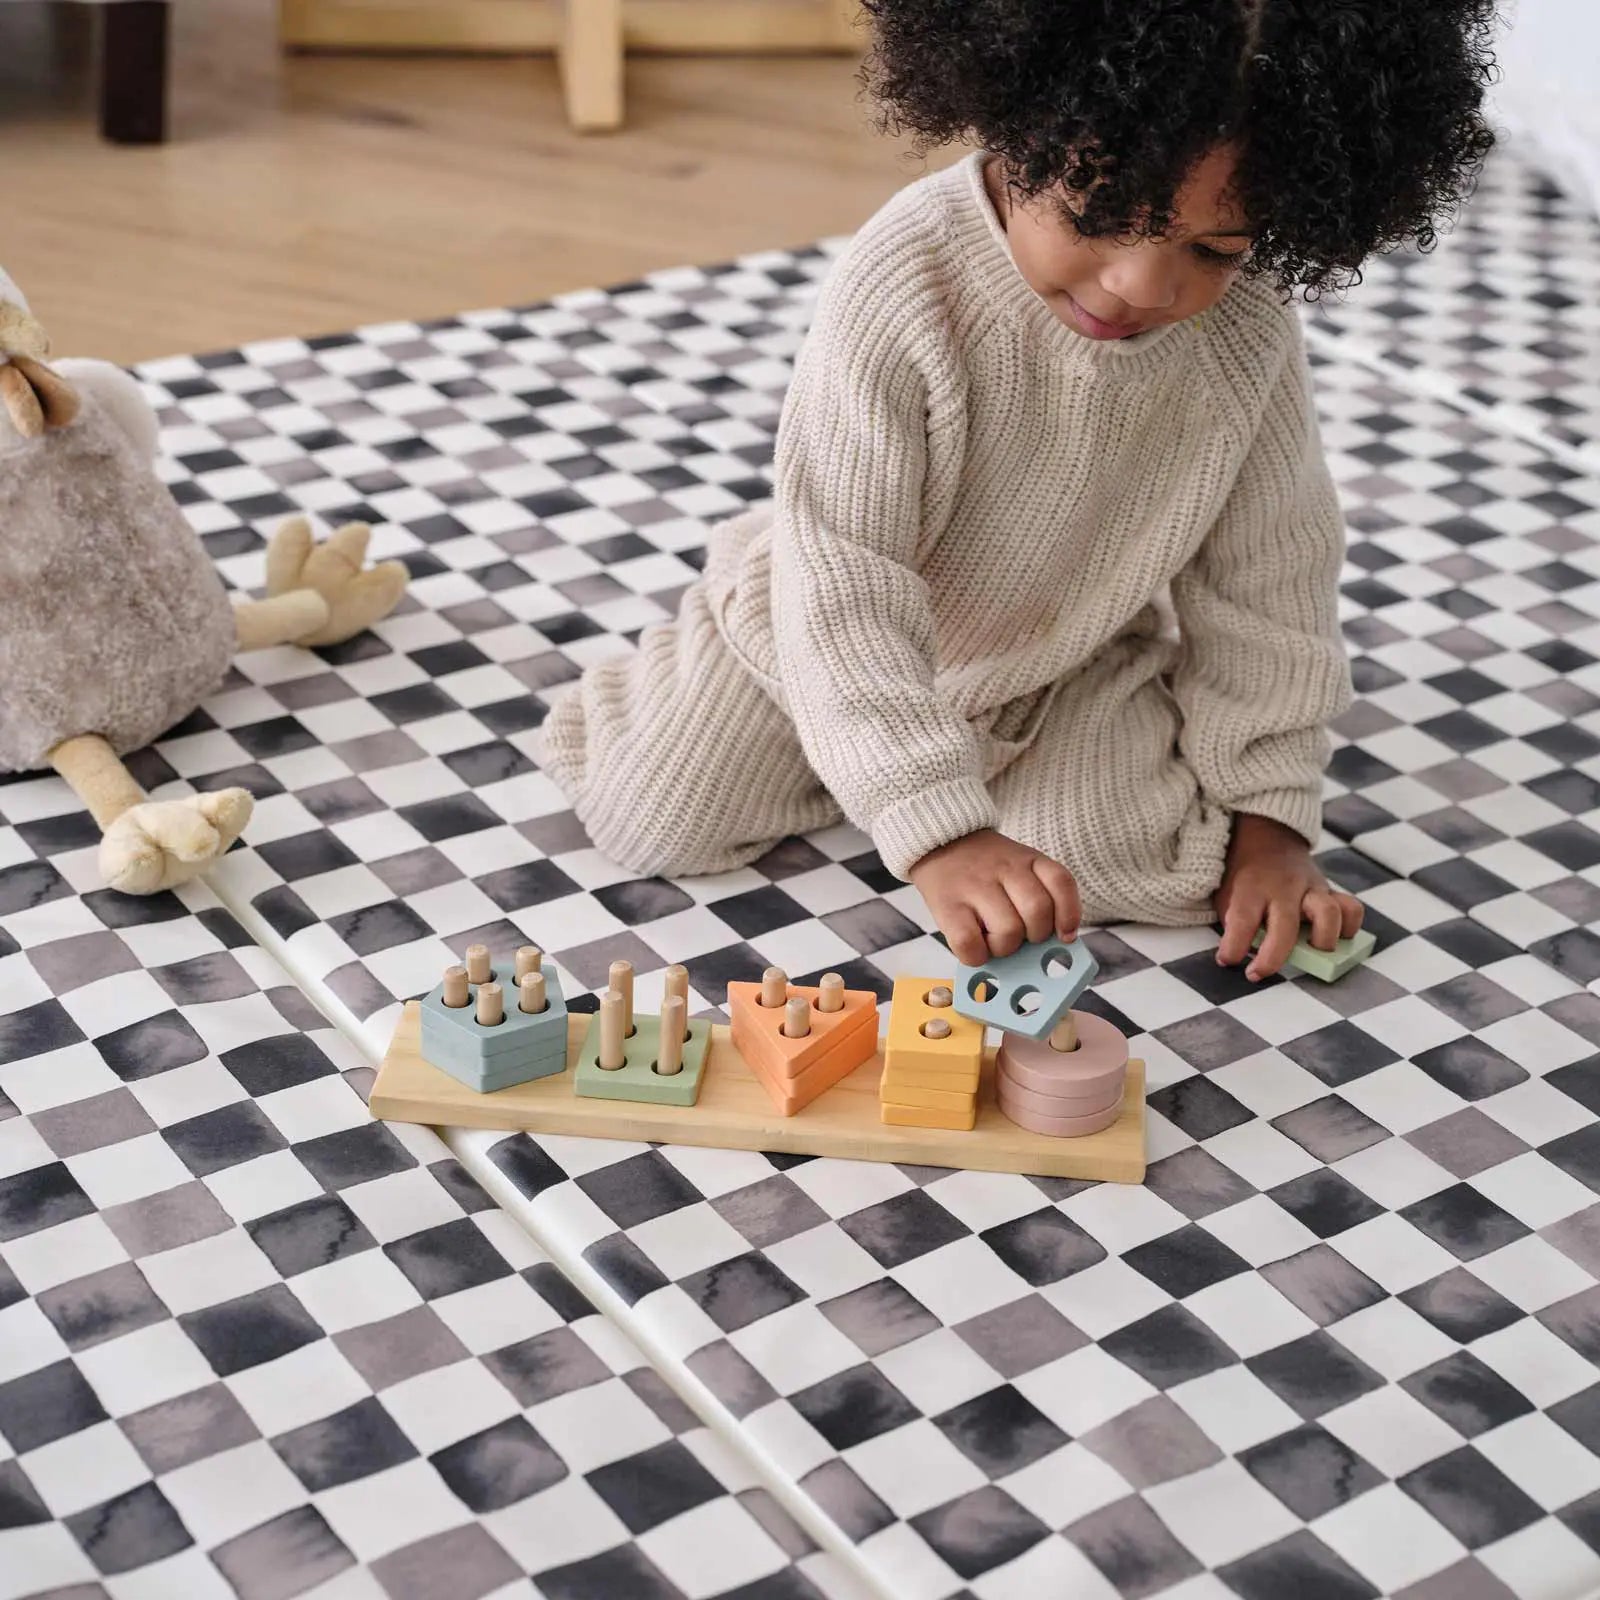 tuxedo black and white checker print tumbling mat with toddler playing with colorful wooden toy